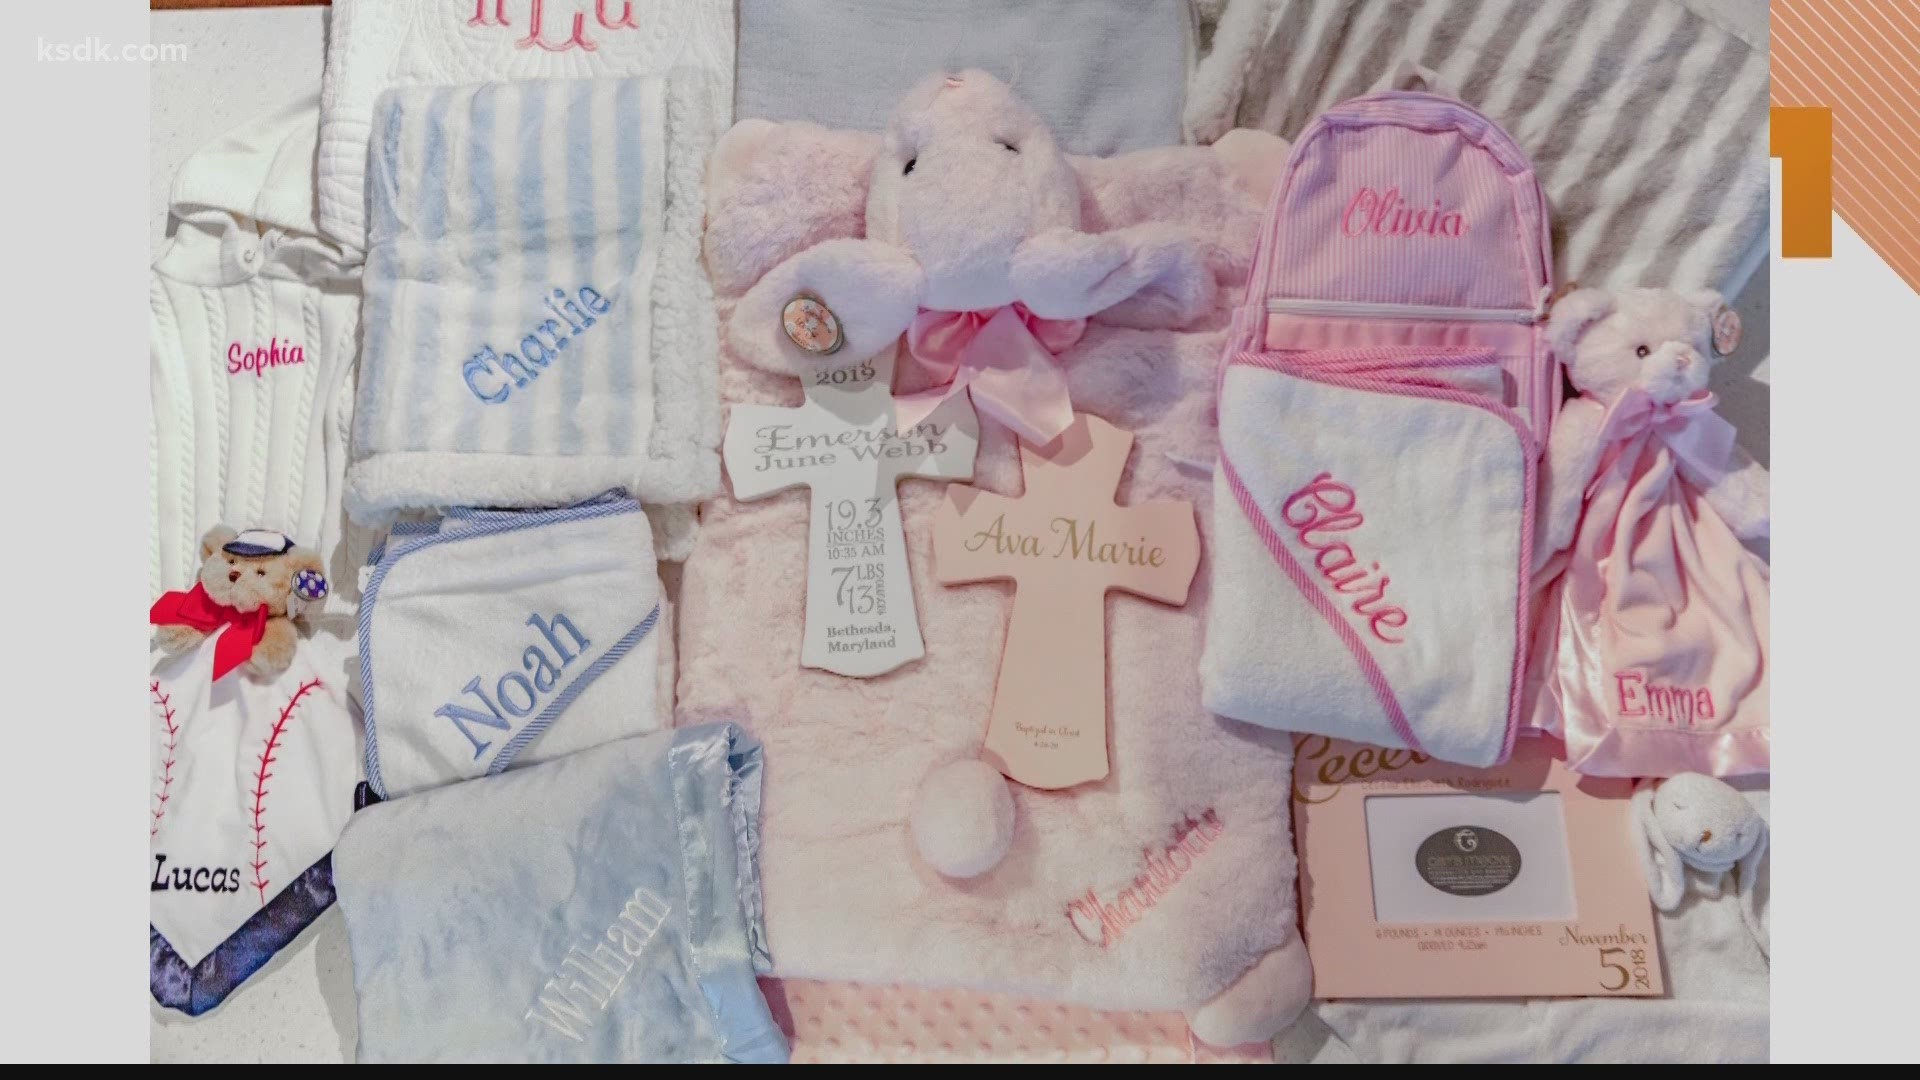 The shop offers gifts for any occasion, from personalized baby blankets to First Communion to weddings.